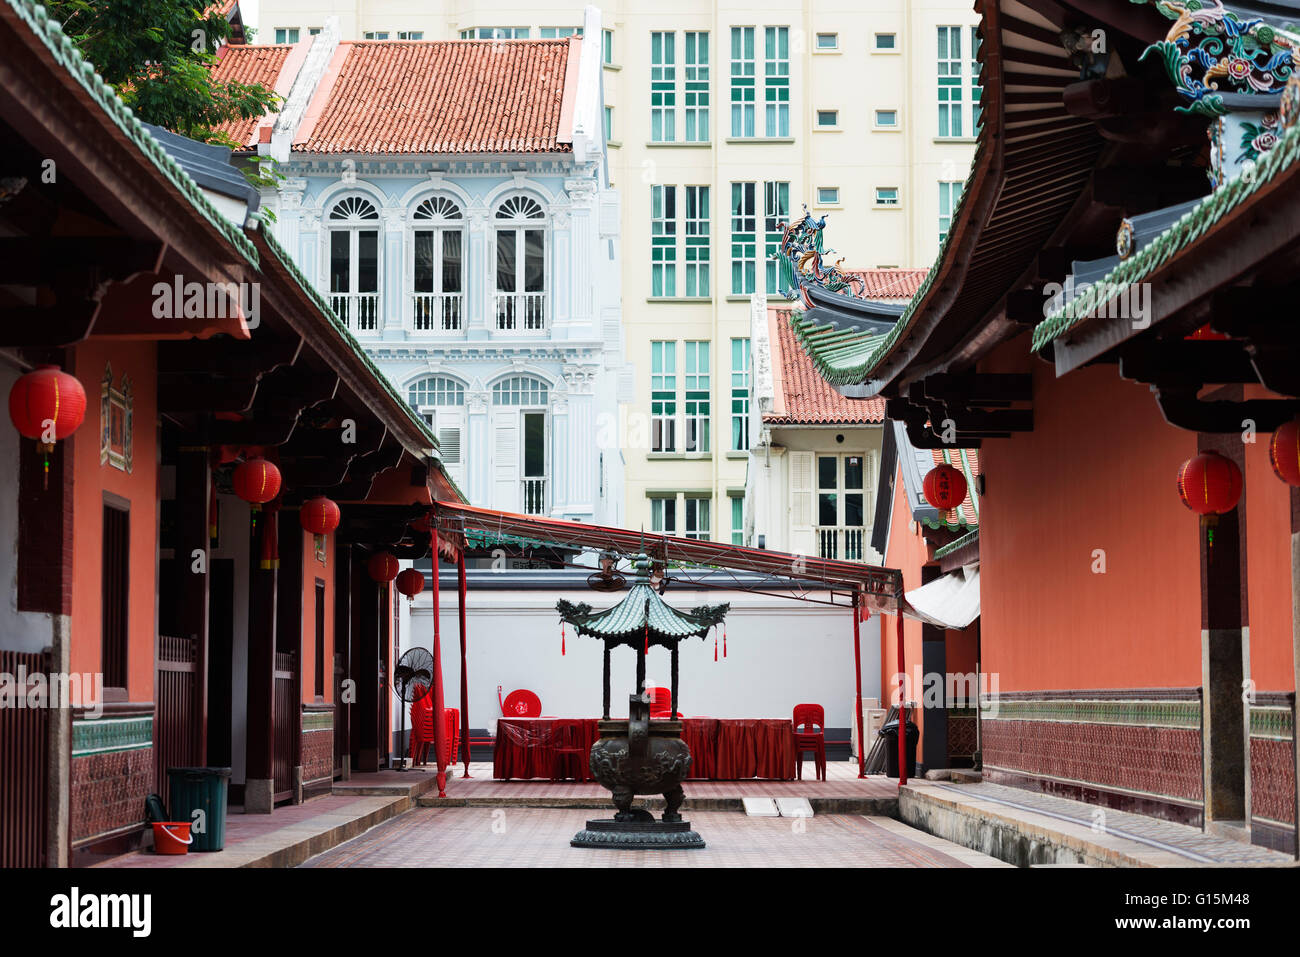 Thian Hock Keng Temple, Chinatown, Singapore, Sud-est asiatico, in Asia Foto Stock